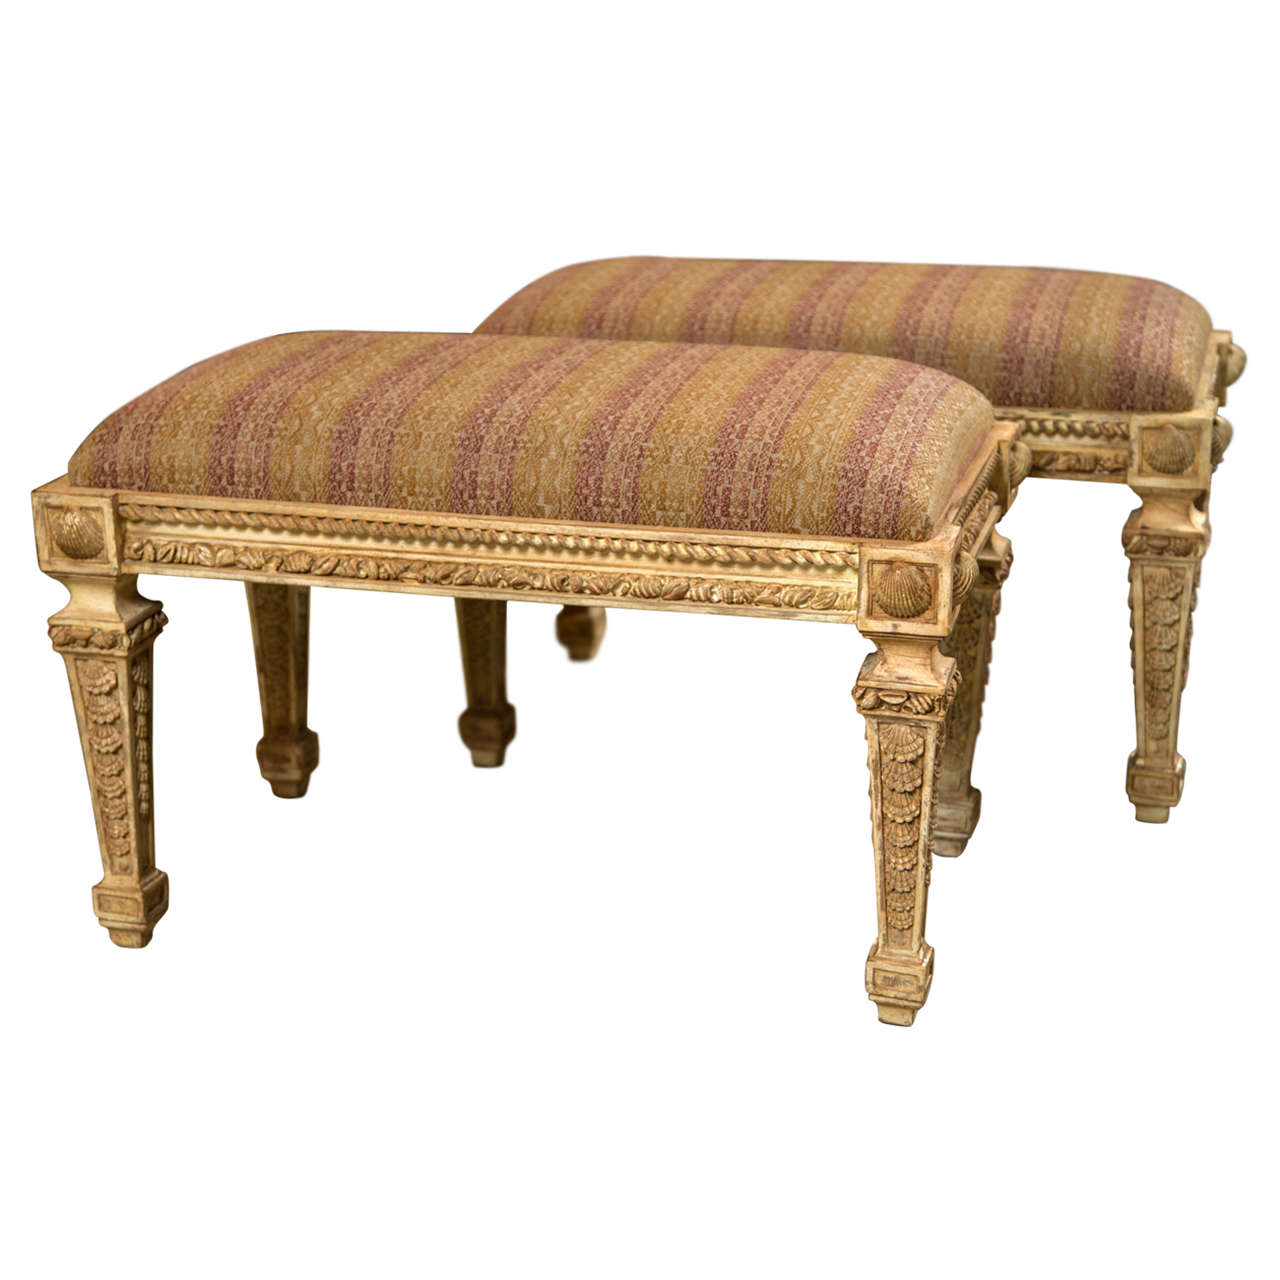 Pair of Hollywood Regency Benches in the Louis XVI Style